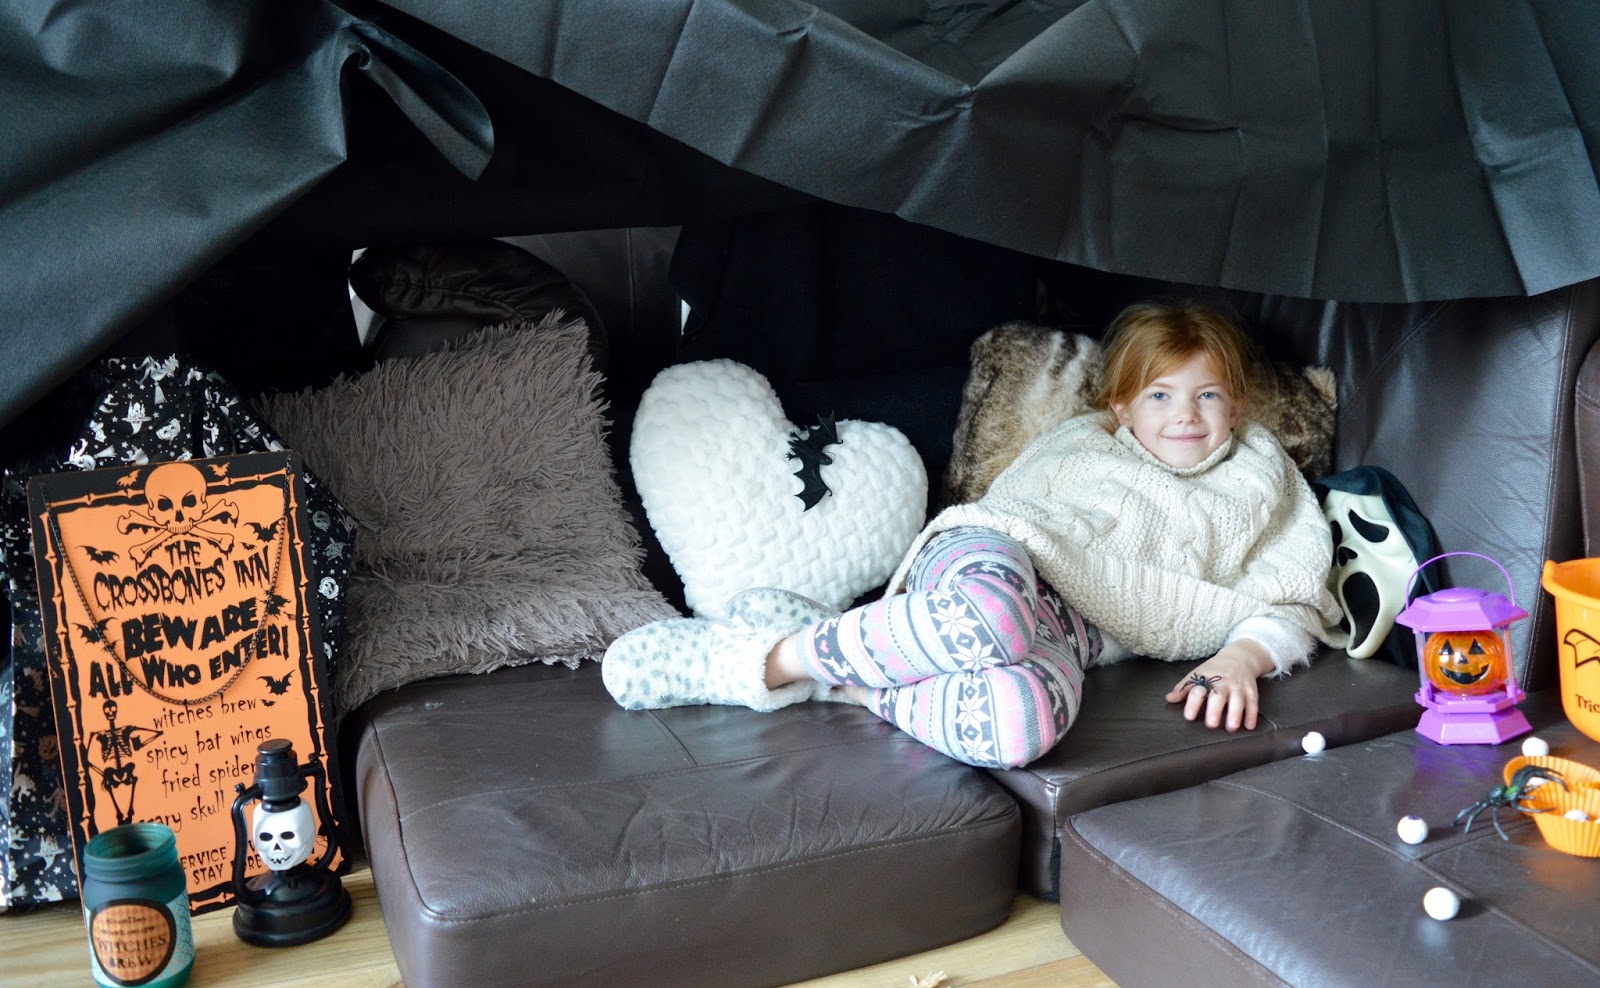 How to create an awesome sofa den for Halloween with DFS #MySofaDen